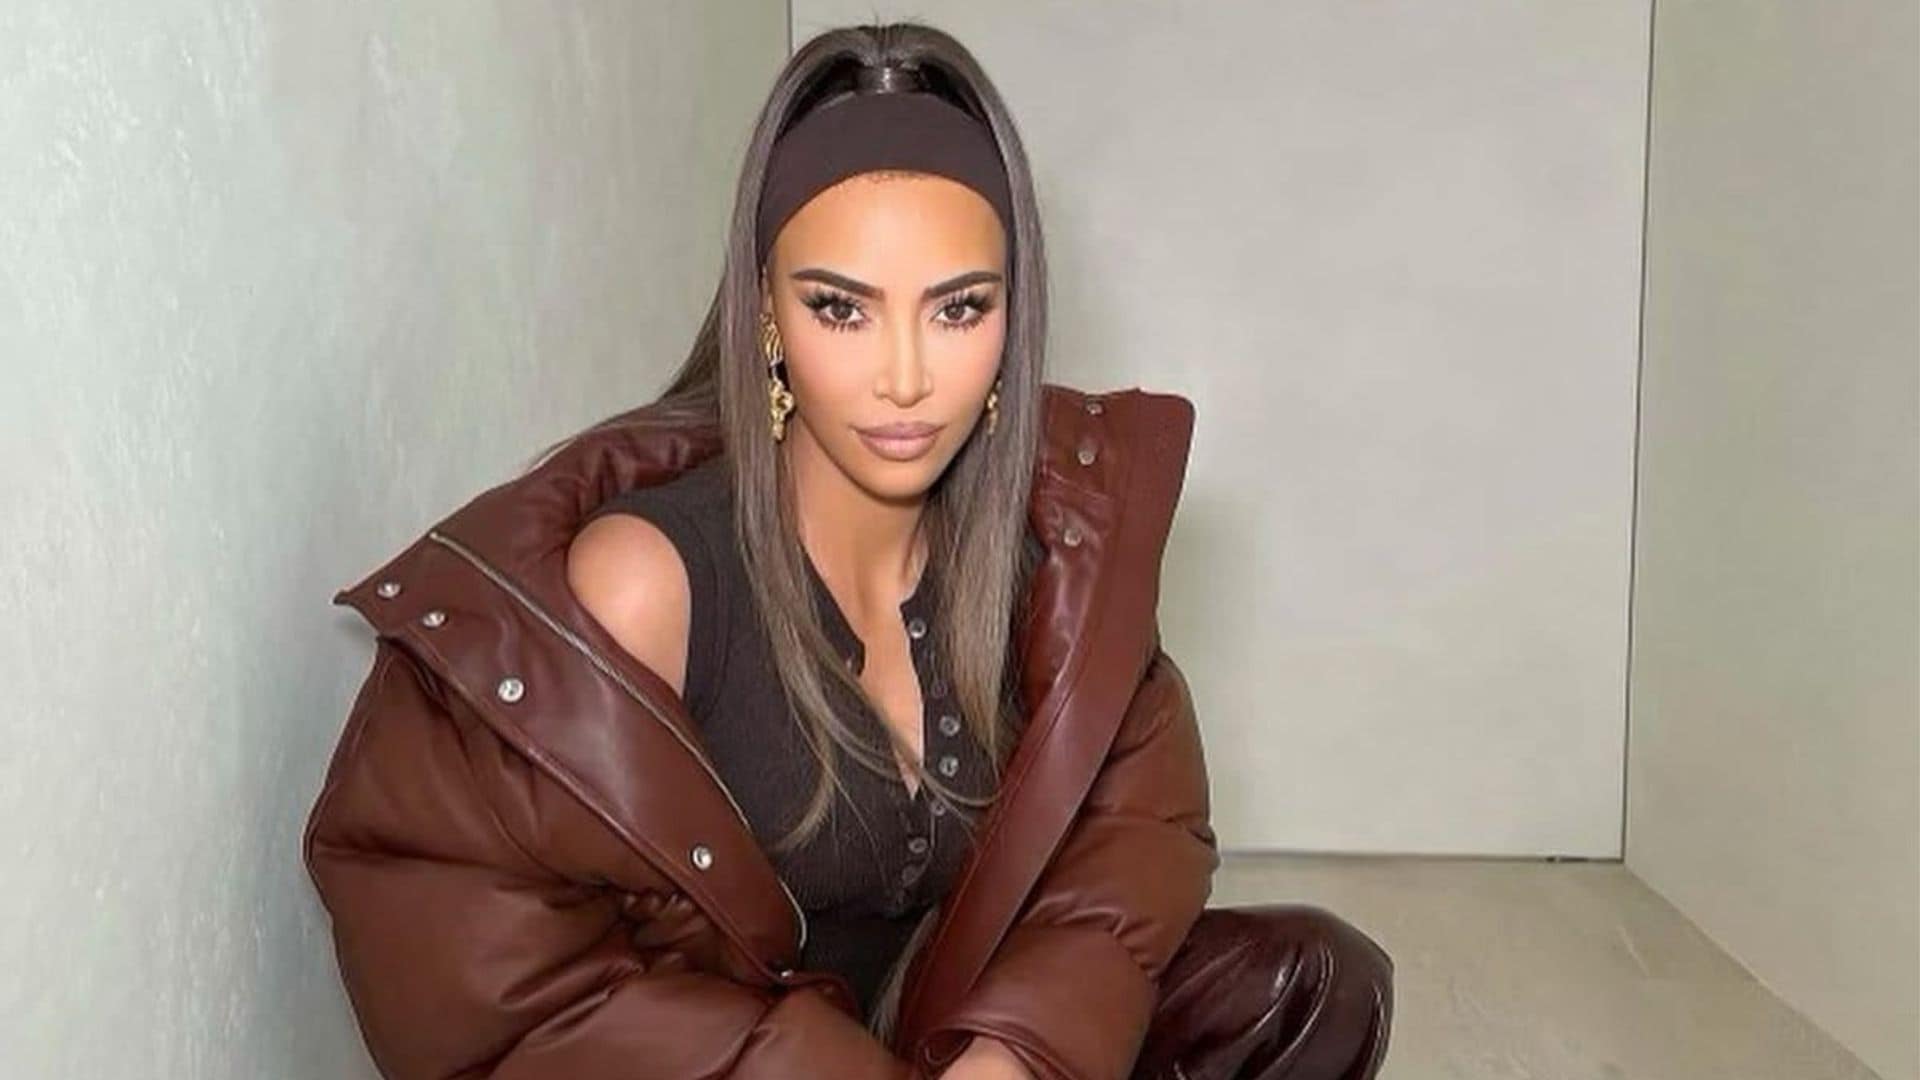 Kim Kardashian has a ‘very serious’ question about her ‘90s look